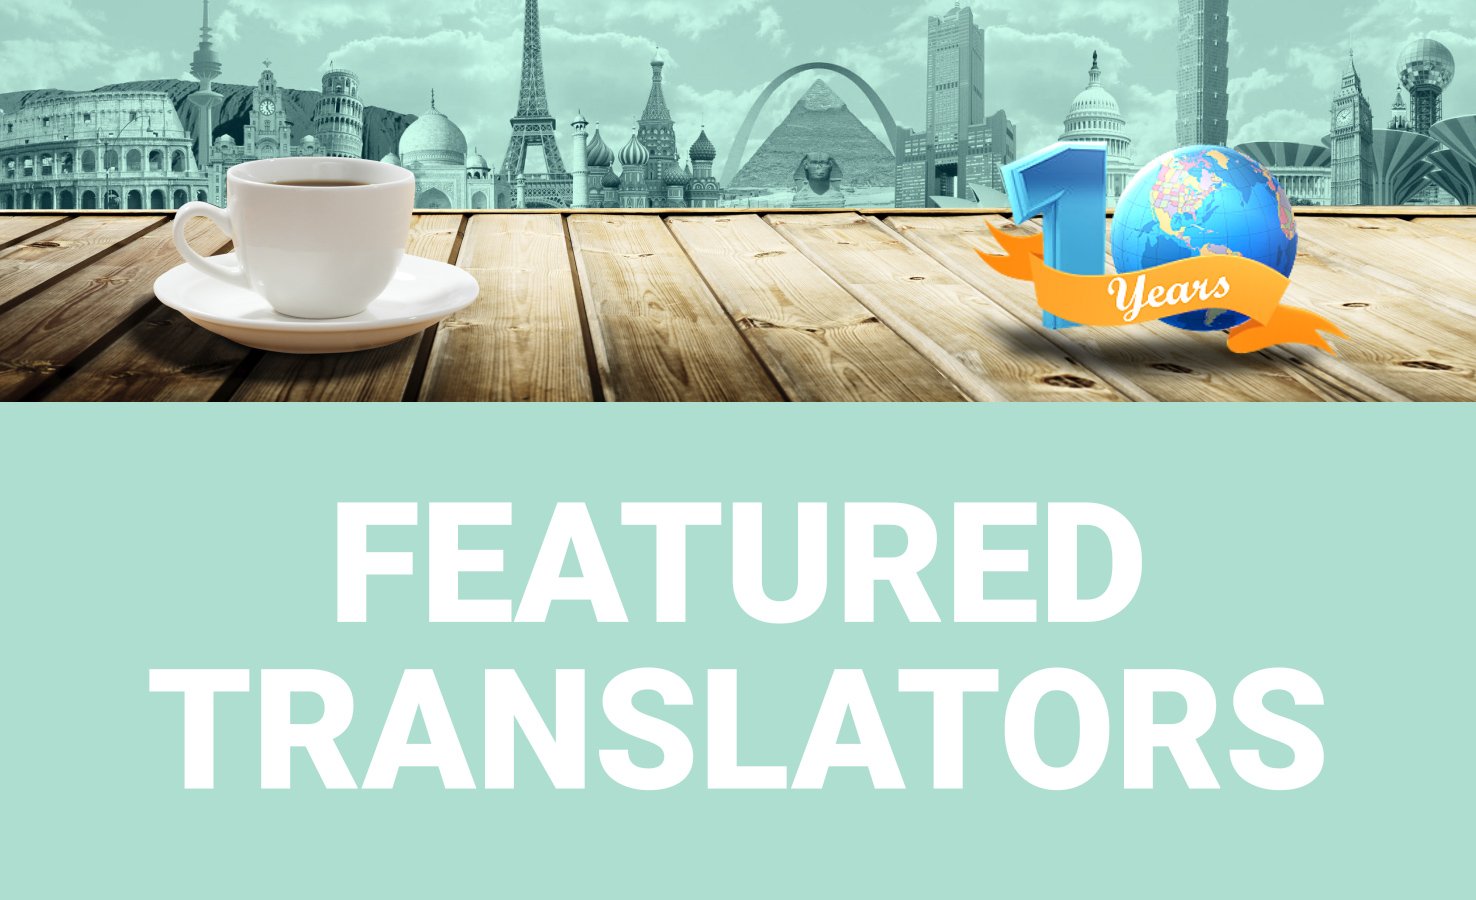 Meet Day Translations Top Translators in Our Anniversary Feature – Part 3